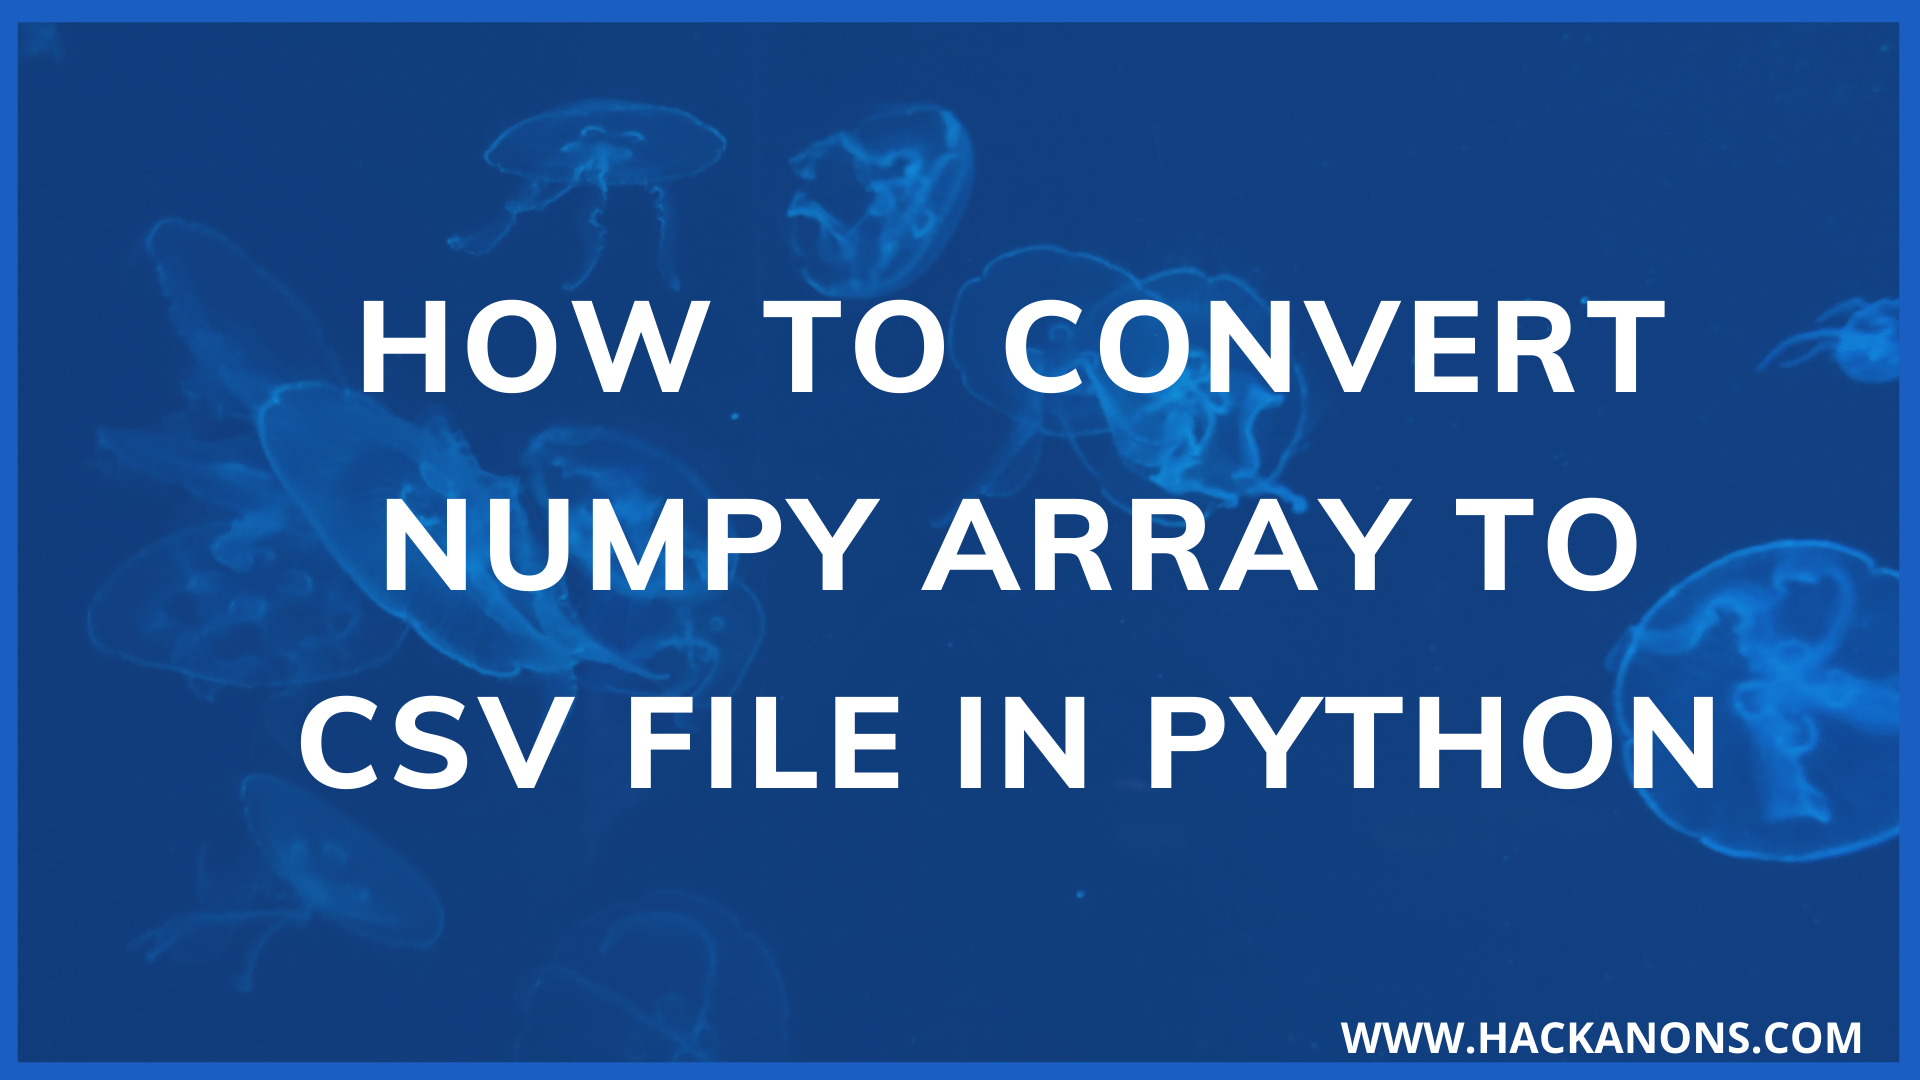 HOW-TO-CONVERT-NUMPY-ARRAY-TO-CSV-FILE-IN-PYTHON